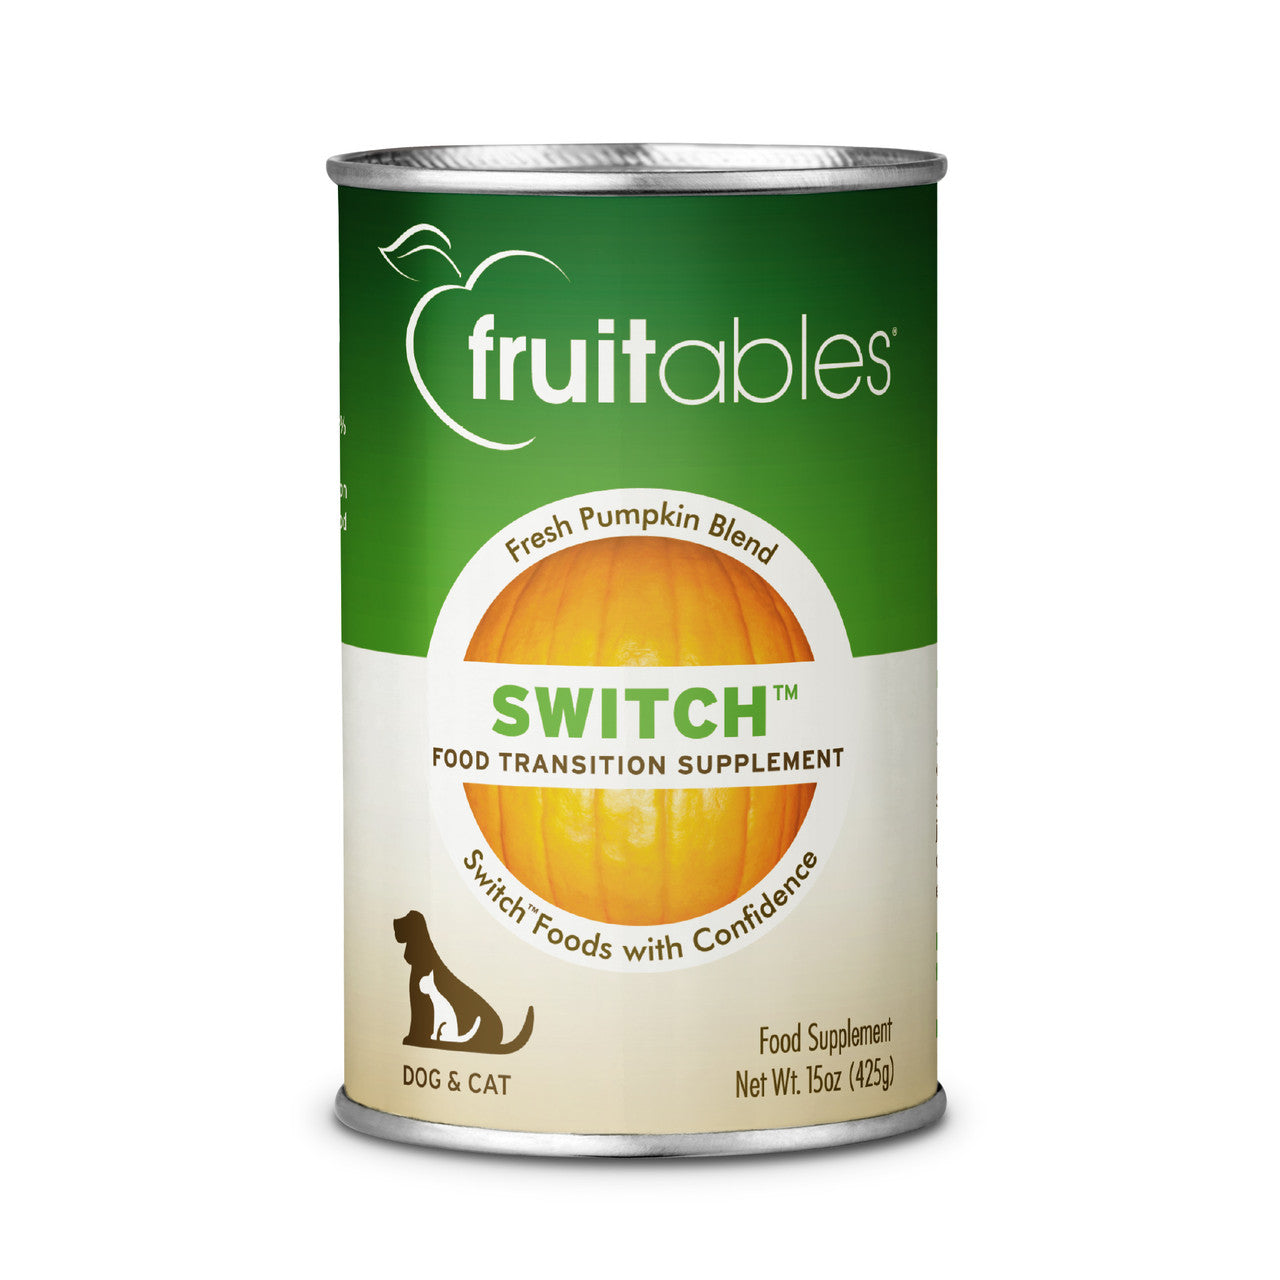 Fruitables Switch Canned Food Transition Supplement 15oz